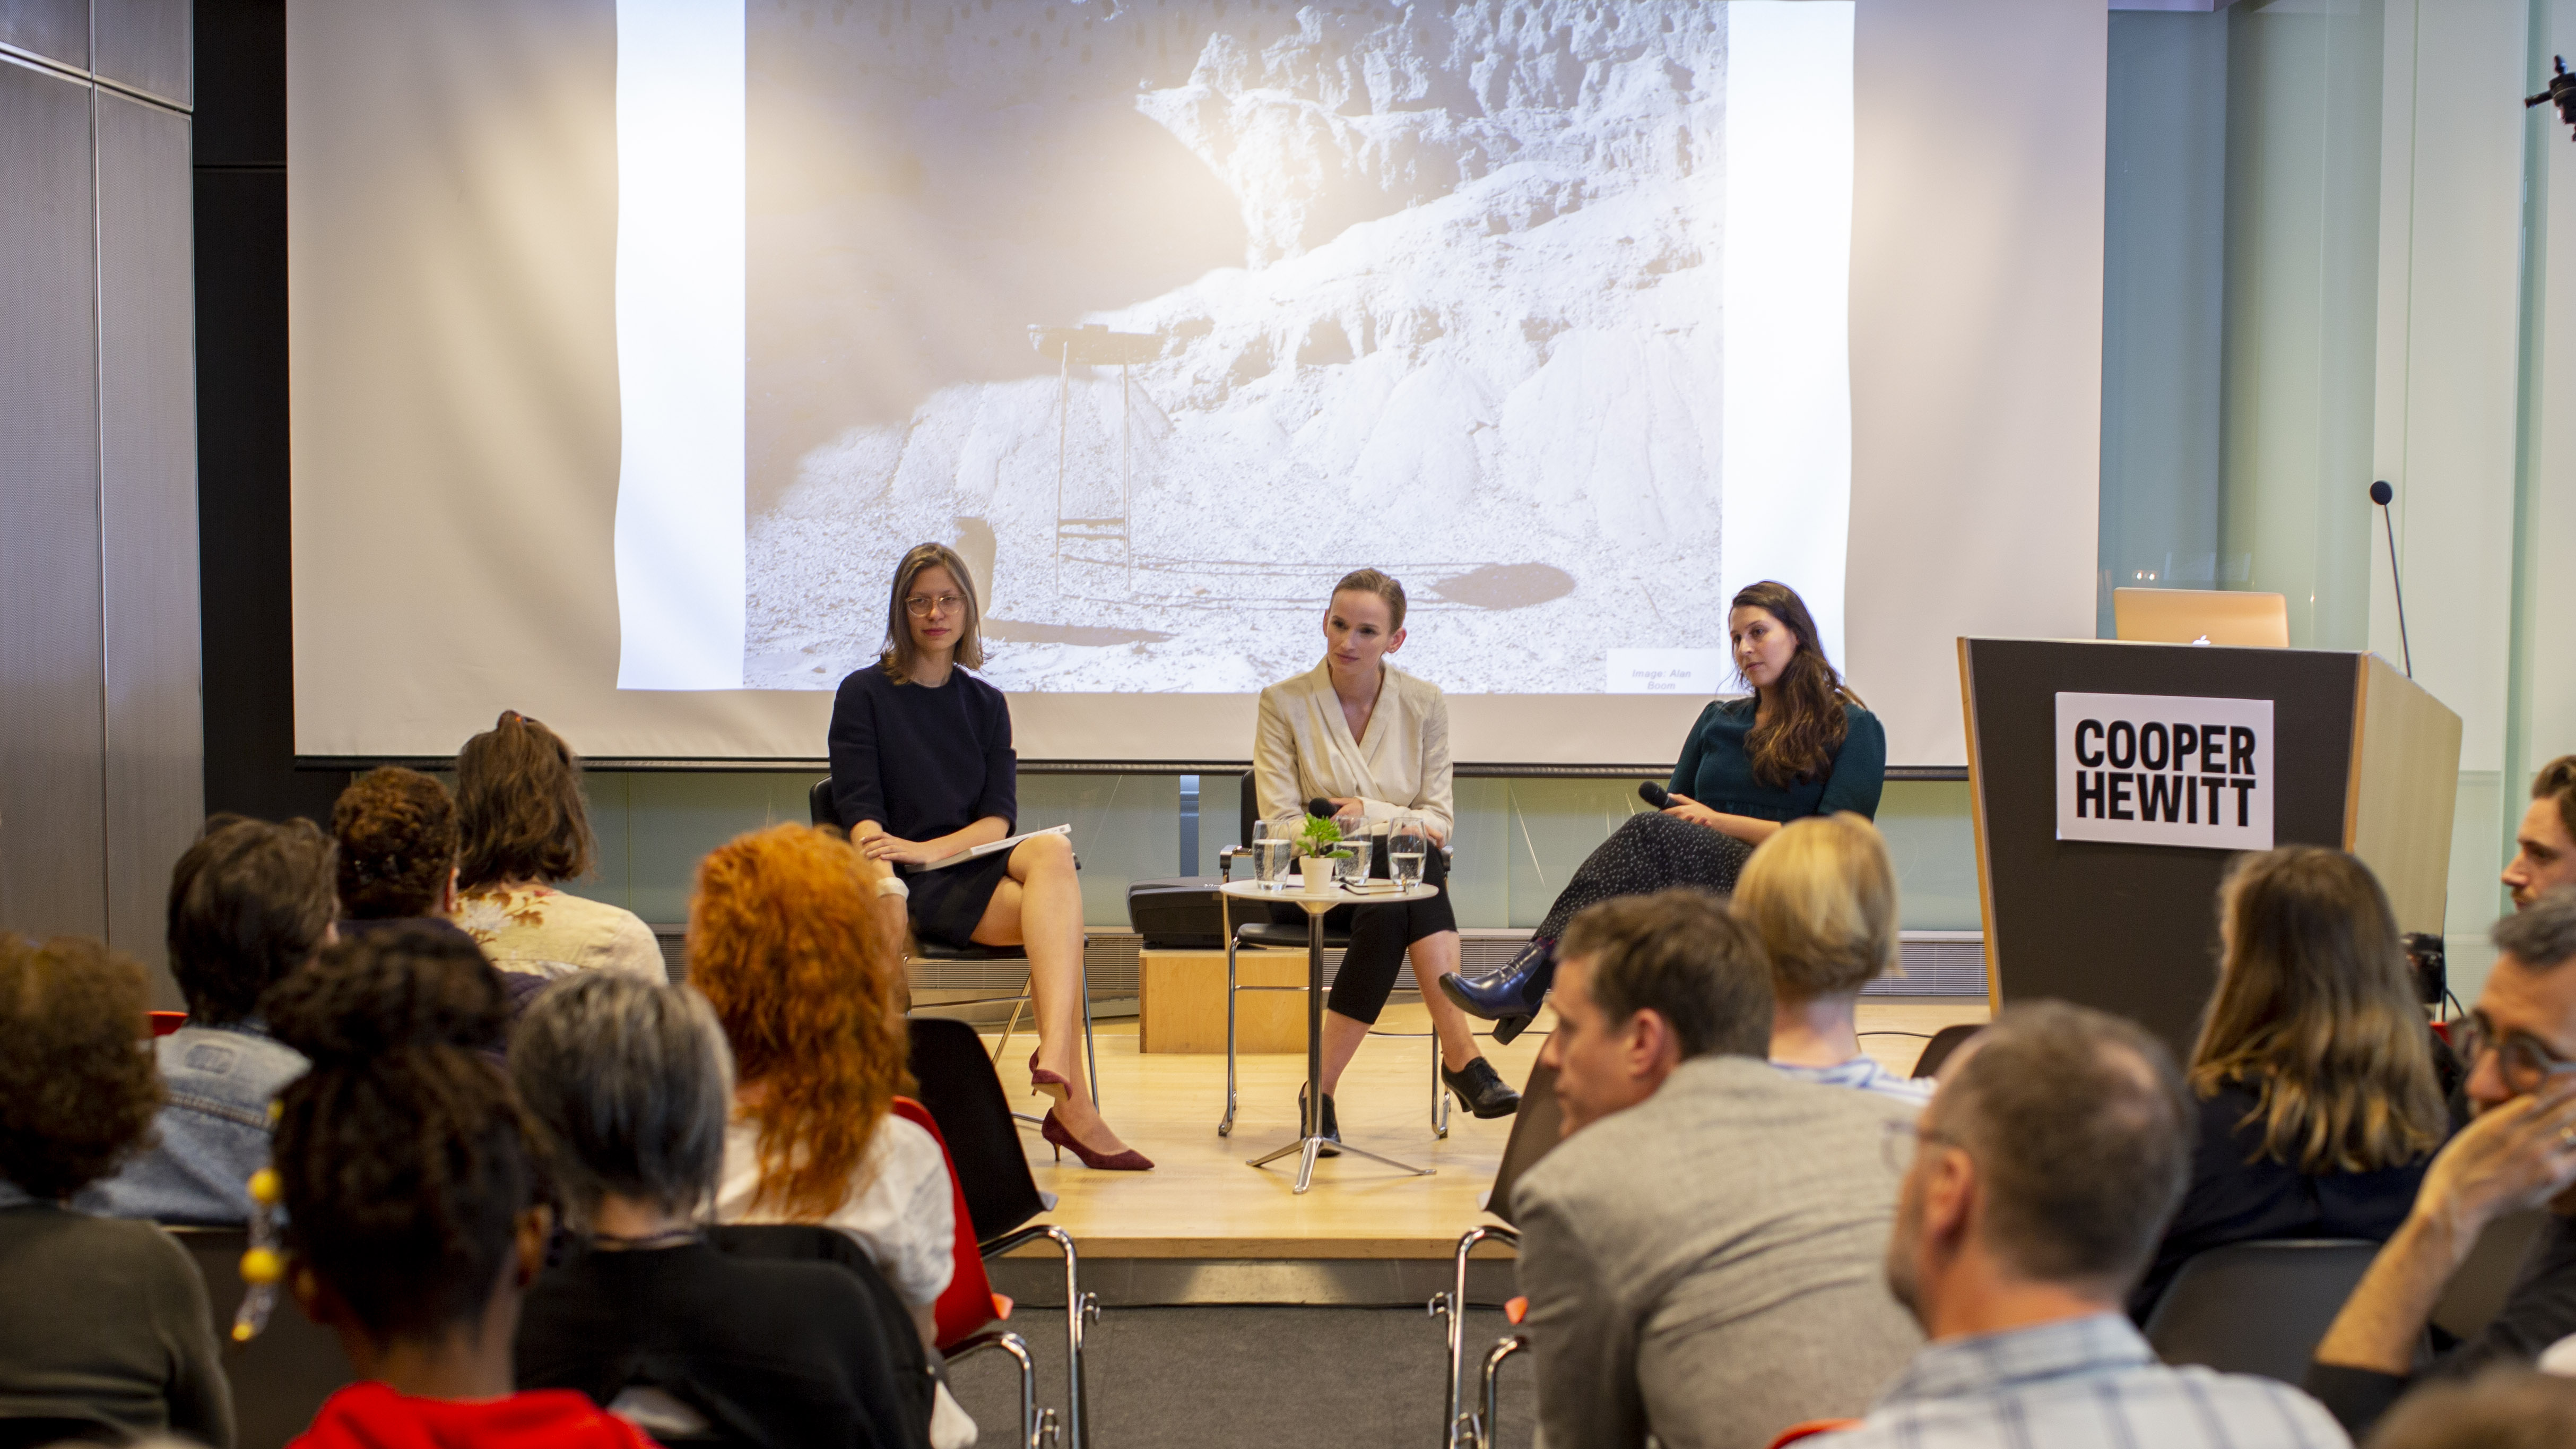 Image from a panel discussion at Cooper Hewitt. Three women sit on a stage, holding microphones.